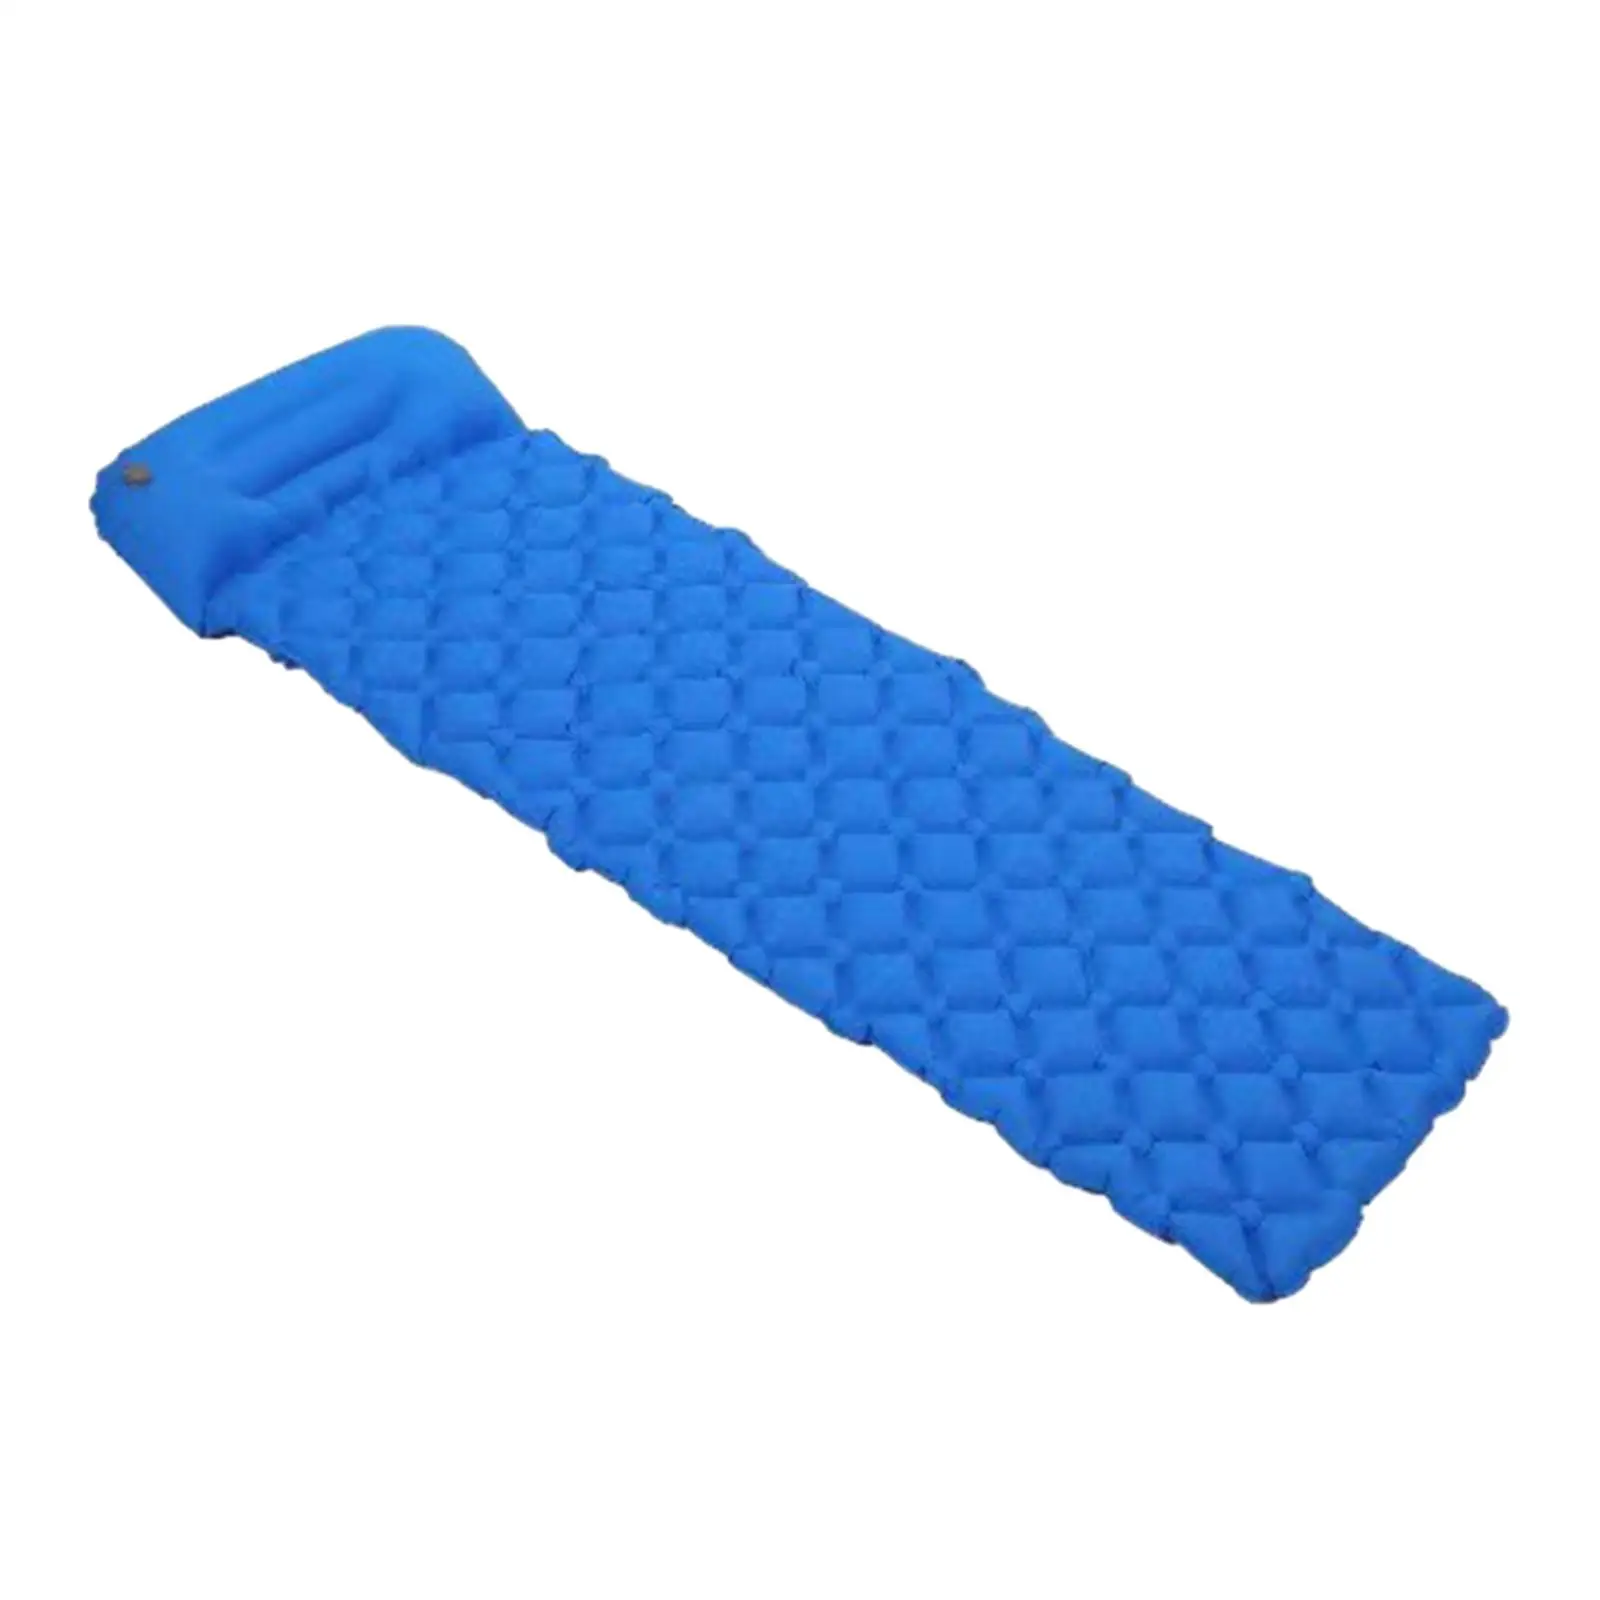 Camping Sleeping Pad Inflatable Sleeping Pads Camping Mat Portable Ultralight for Outdoor Tent Backpacking Traveling Hiking